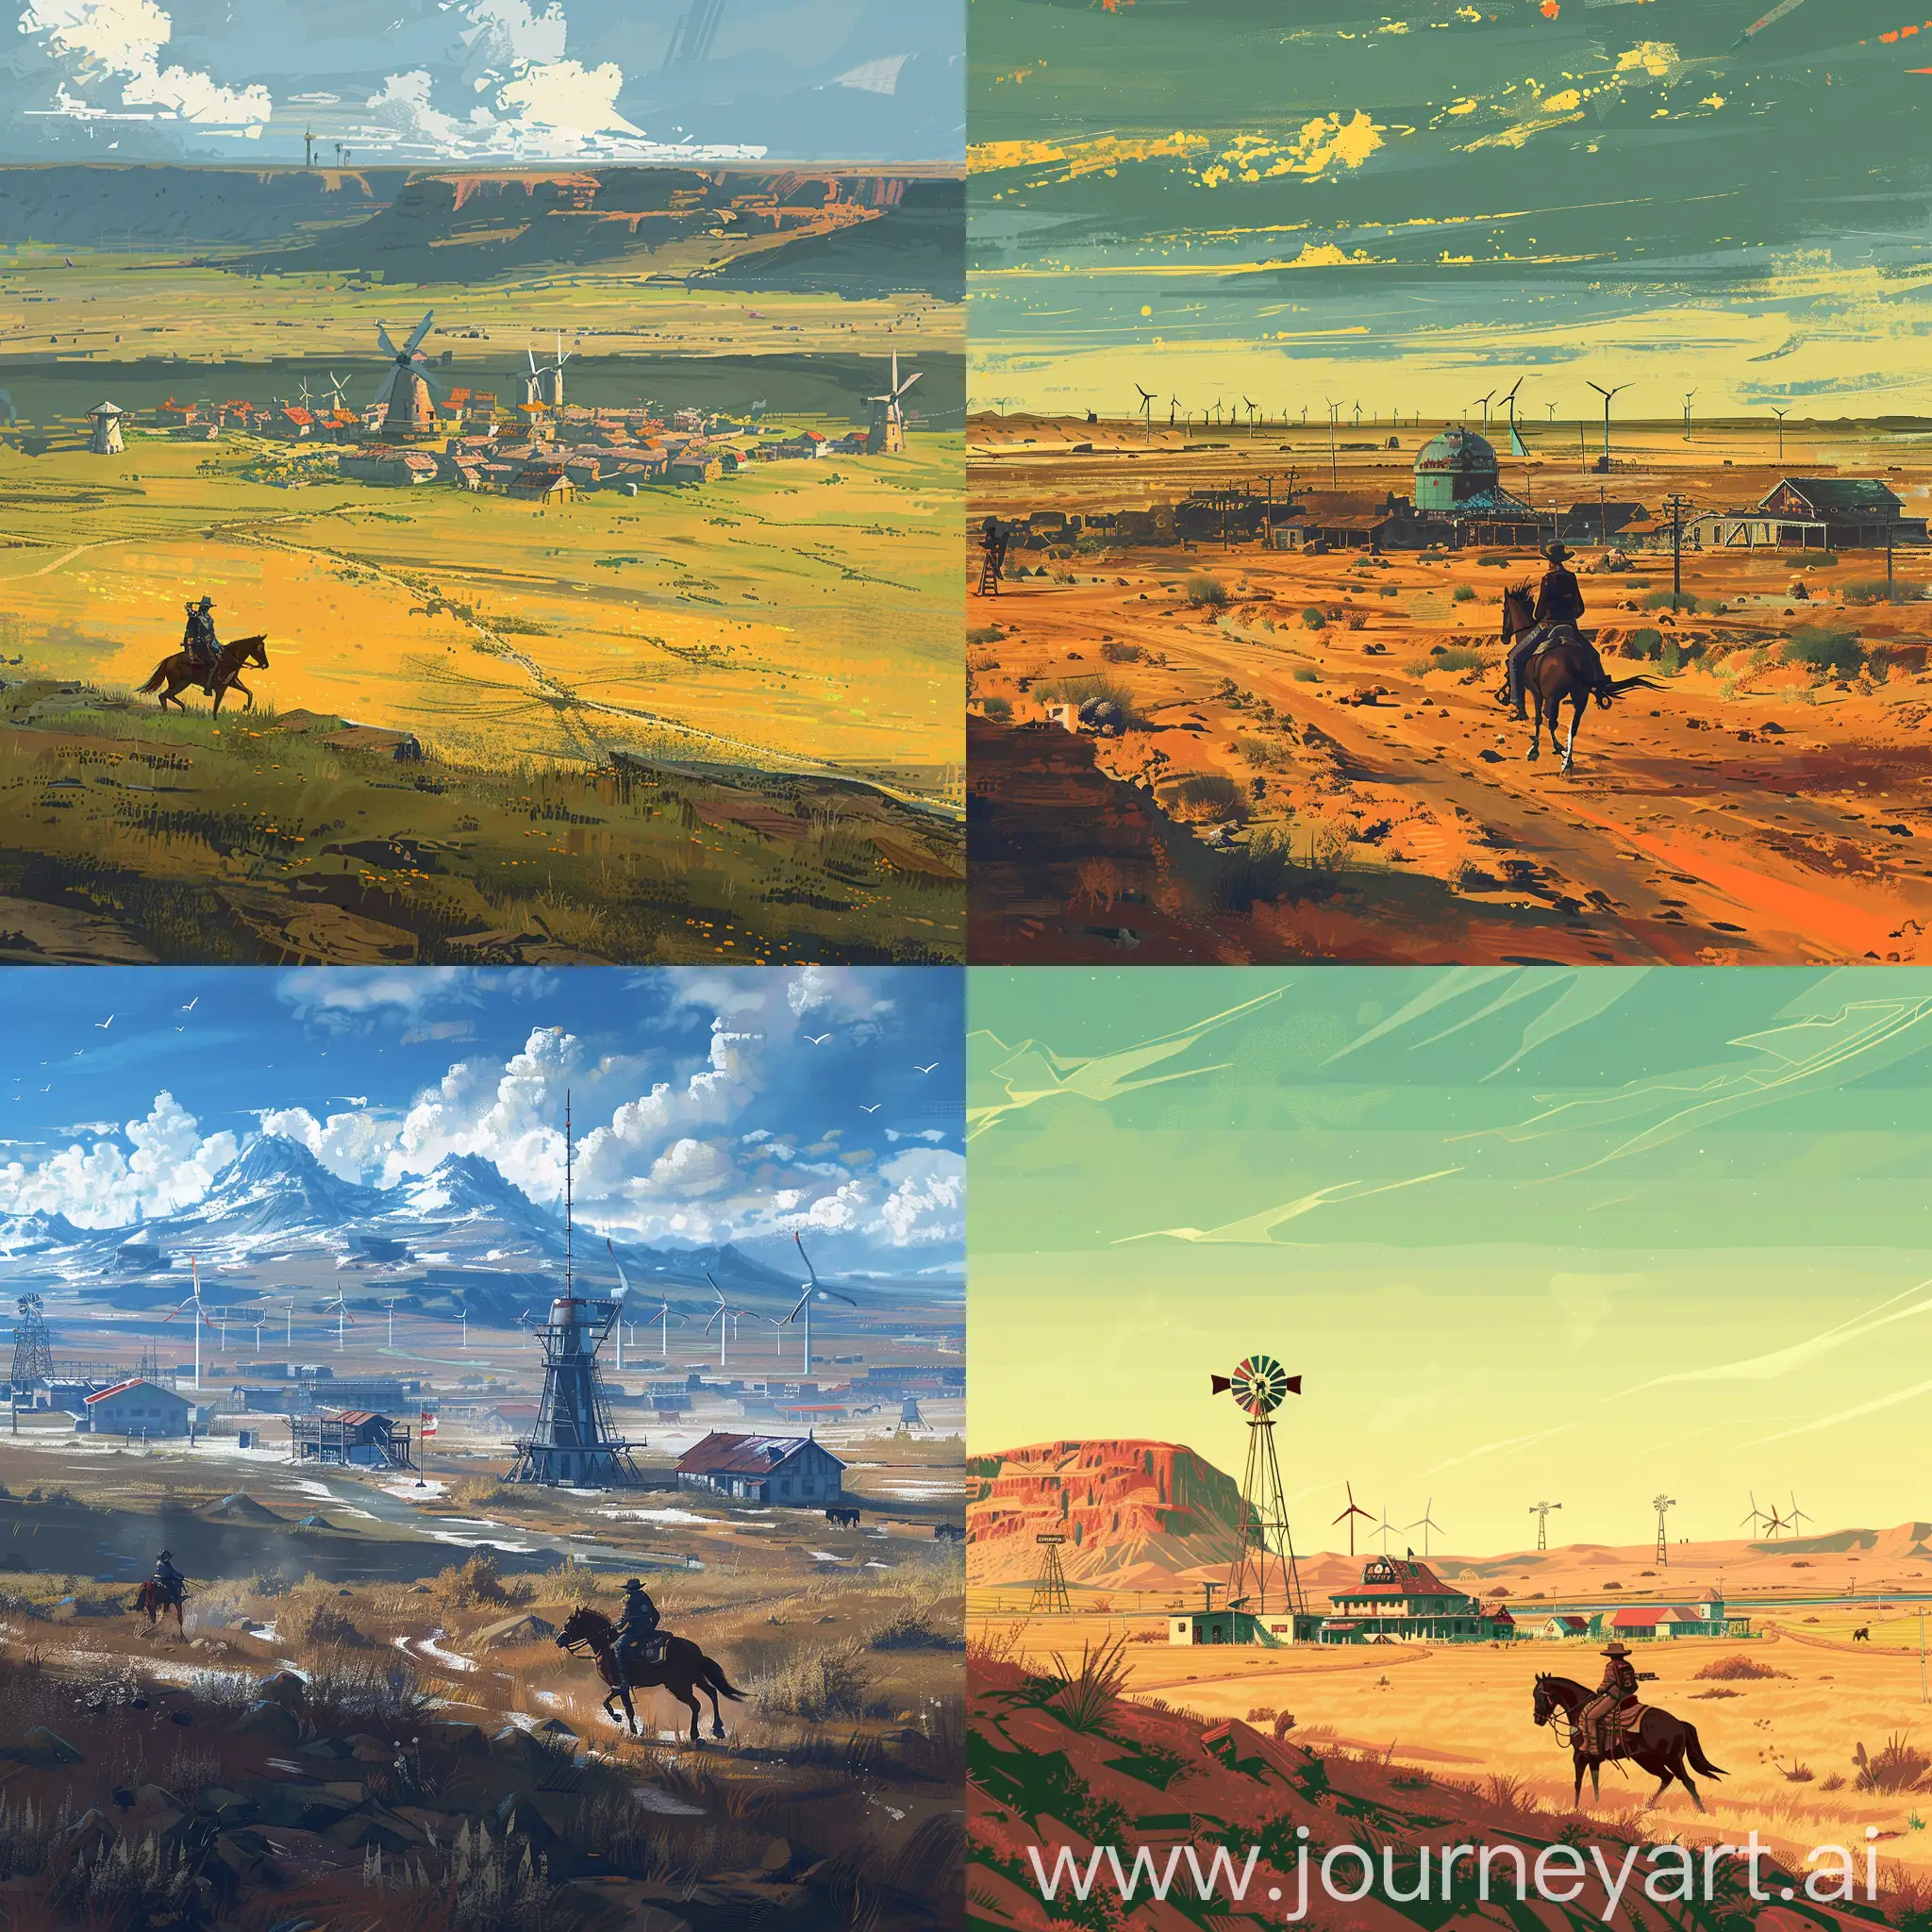 Lonely-Cowboy-Galloping-in-the-Futuristic-Cyberpunk-Wild-West